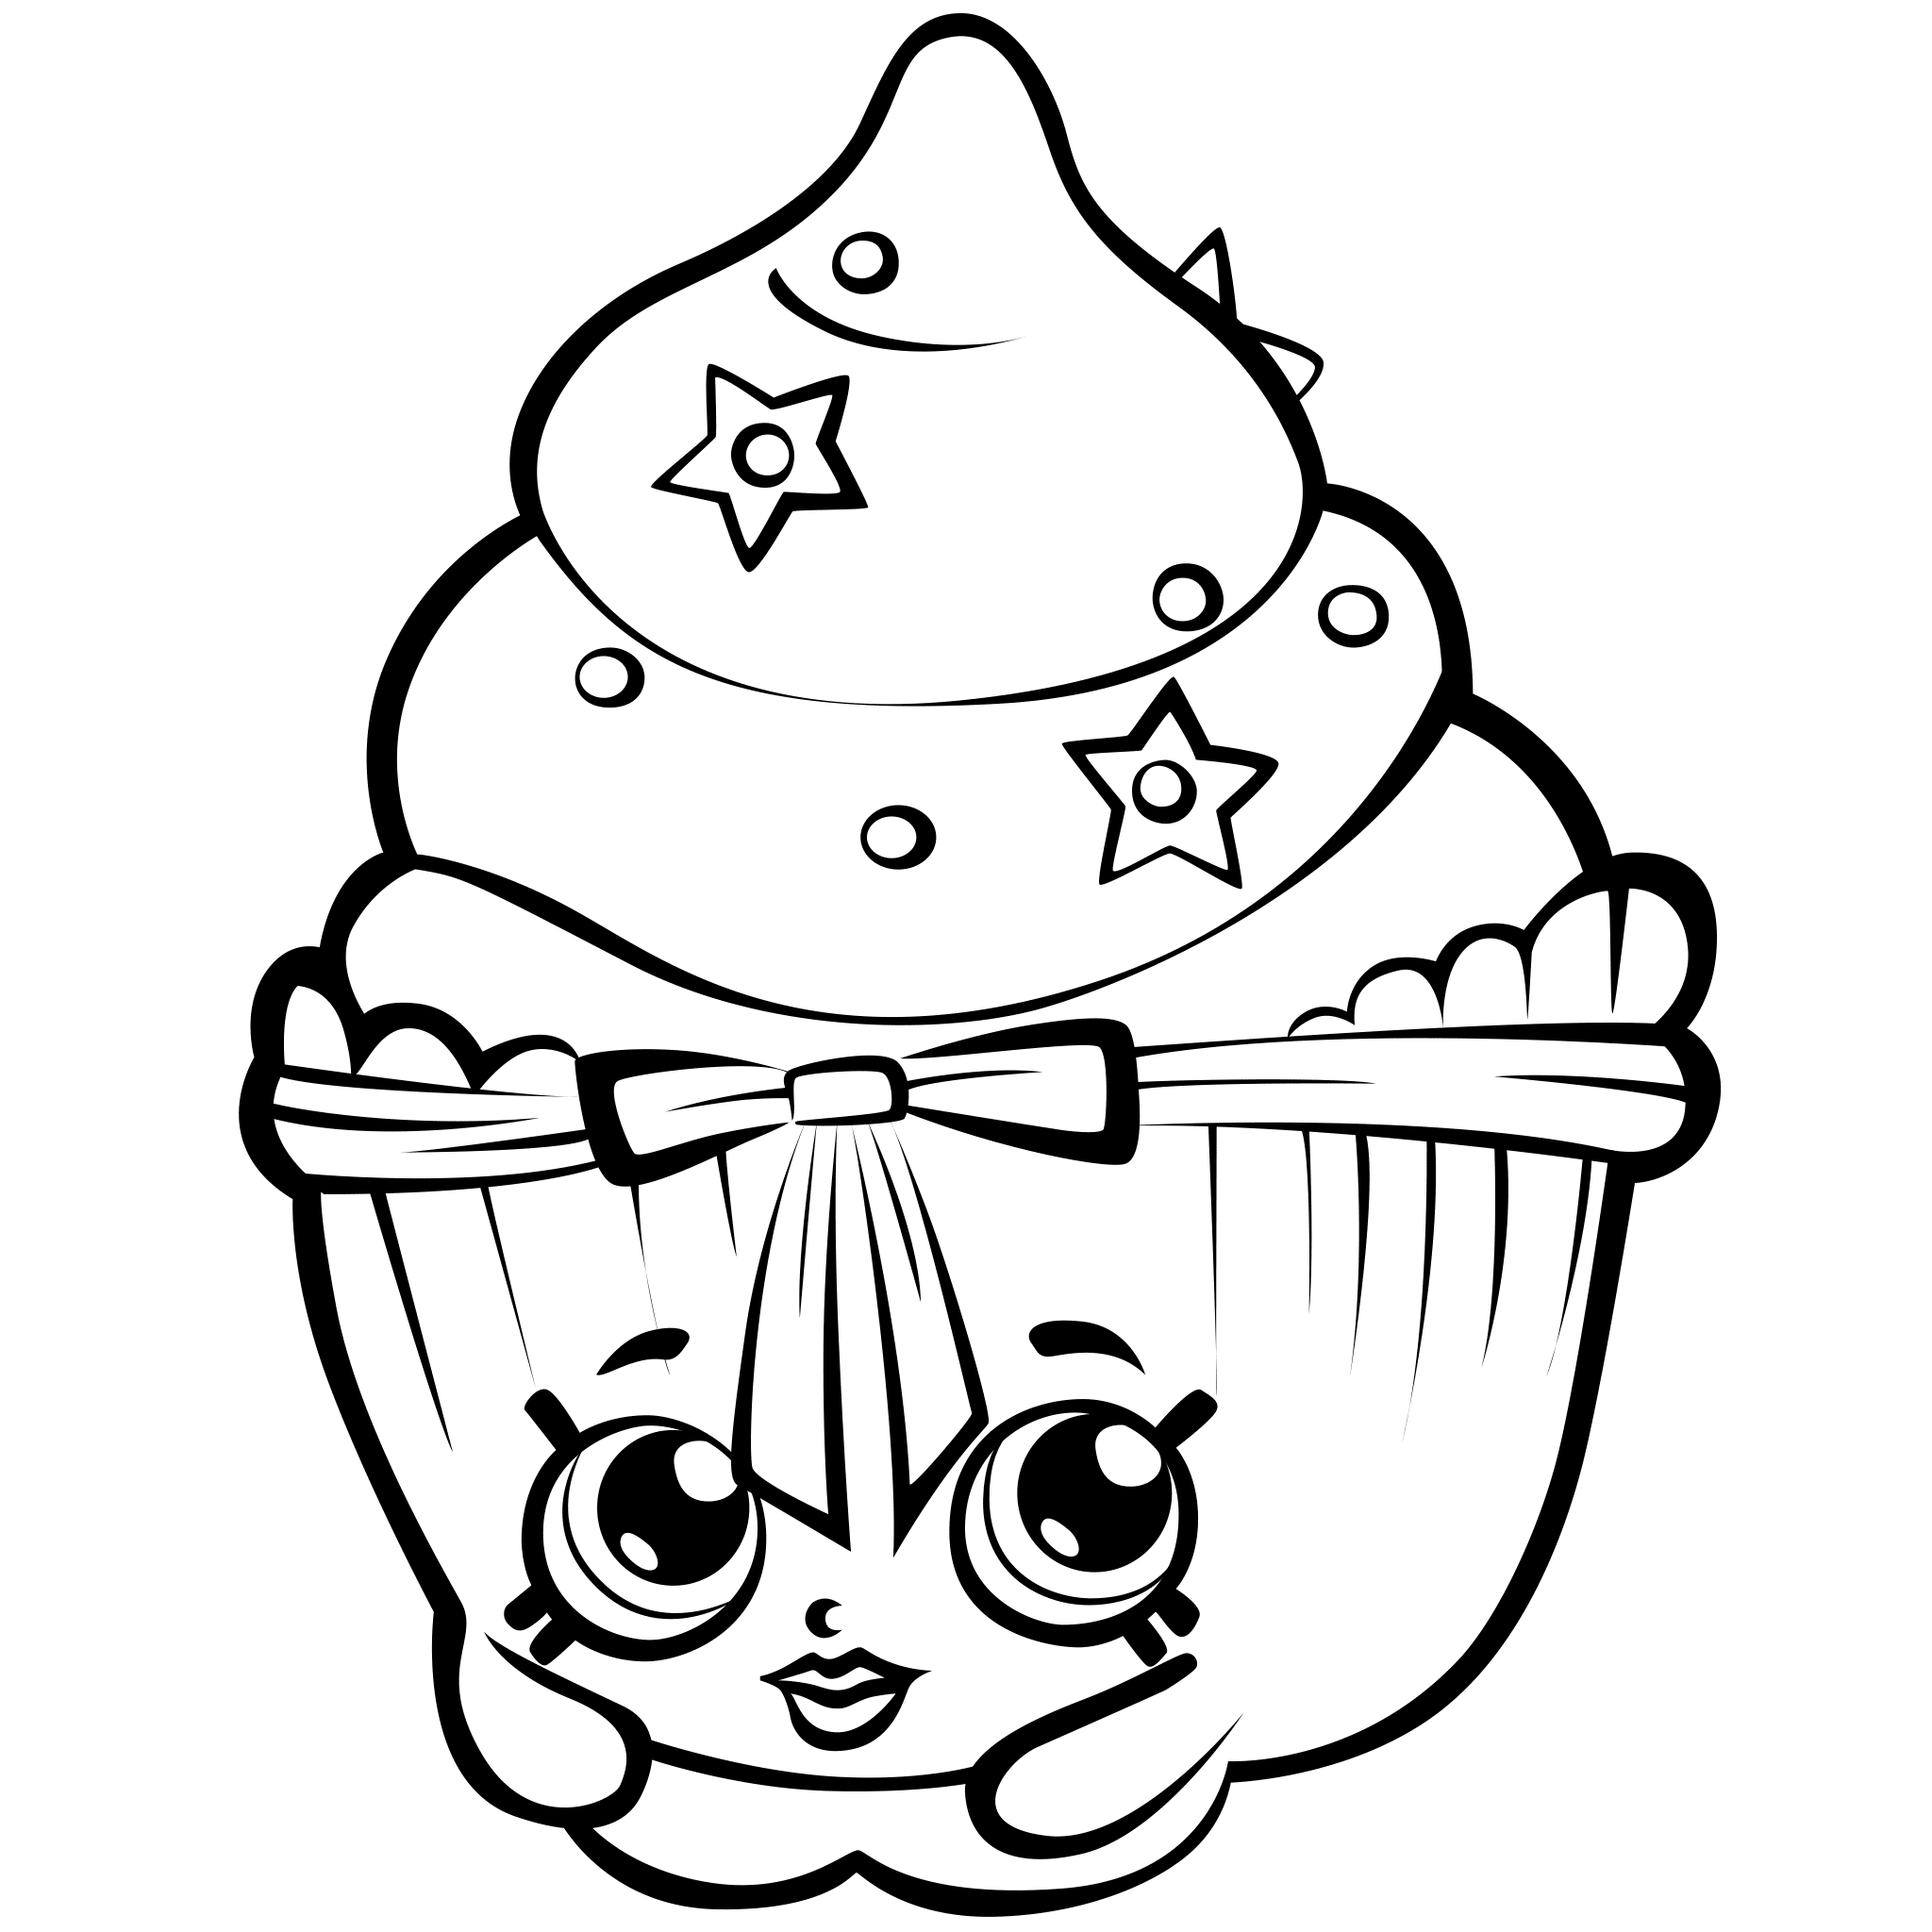 Shopkins Coloring Pages Best Coloring Pages For Kids Coloring Wallpapers Download Free Images Wallpaper [coloring436.blogspot.com]